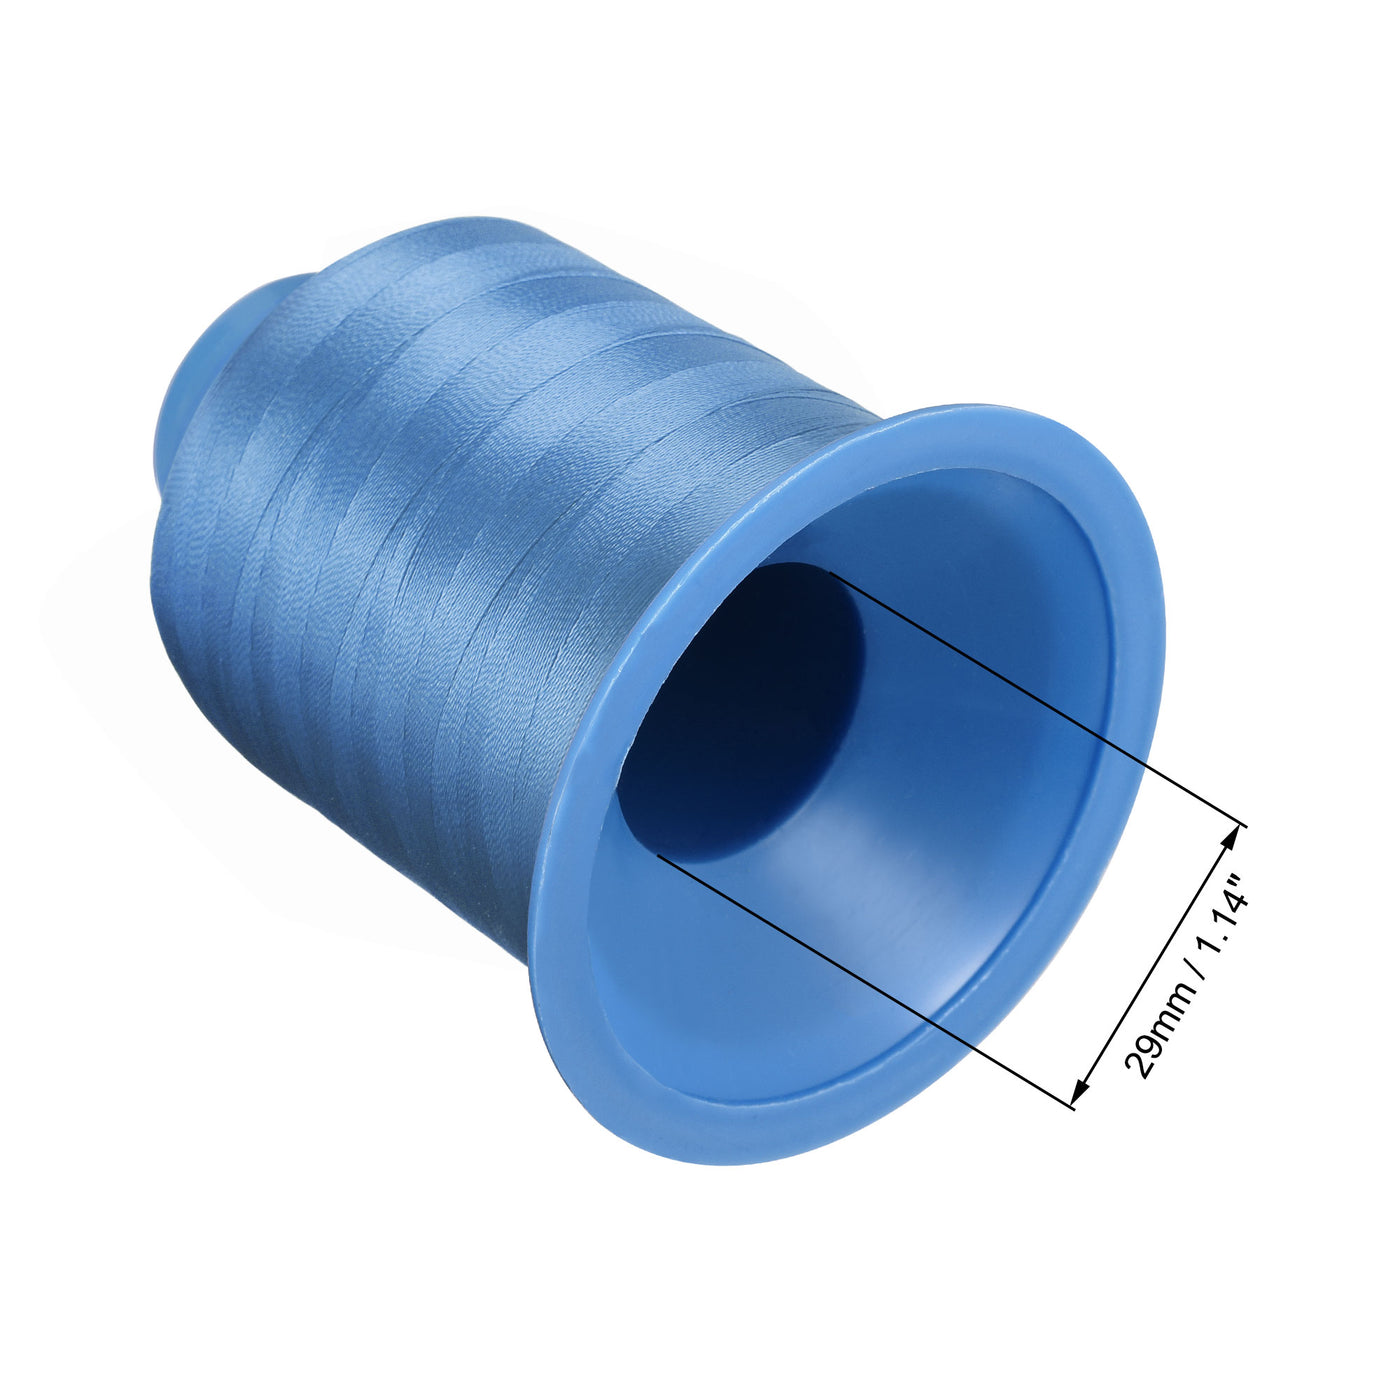 Uxcell Uxcell Bonded Polyester Threads Extra-strong 1312 Yards 210D/0.32mm (Snow, 2pcs)